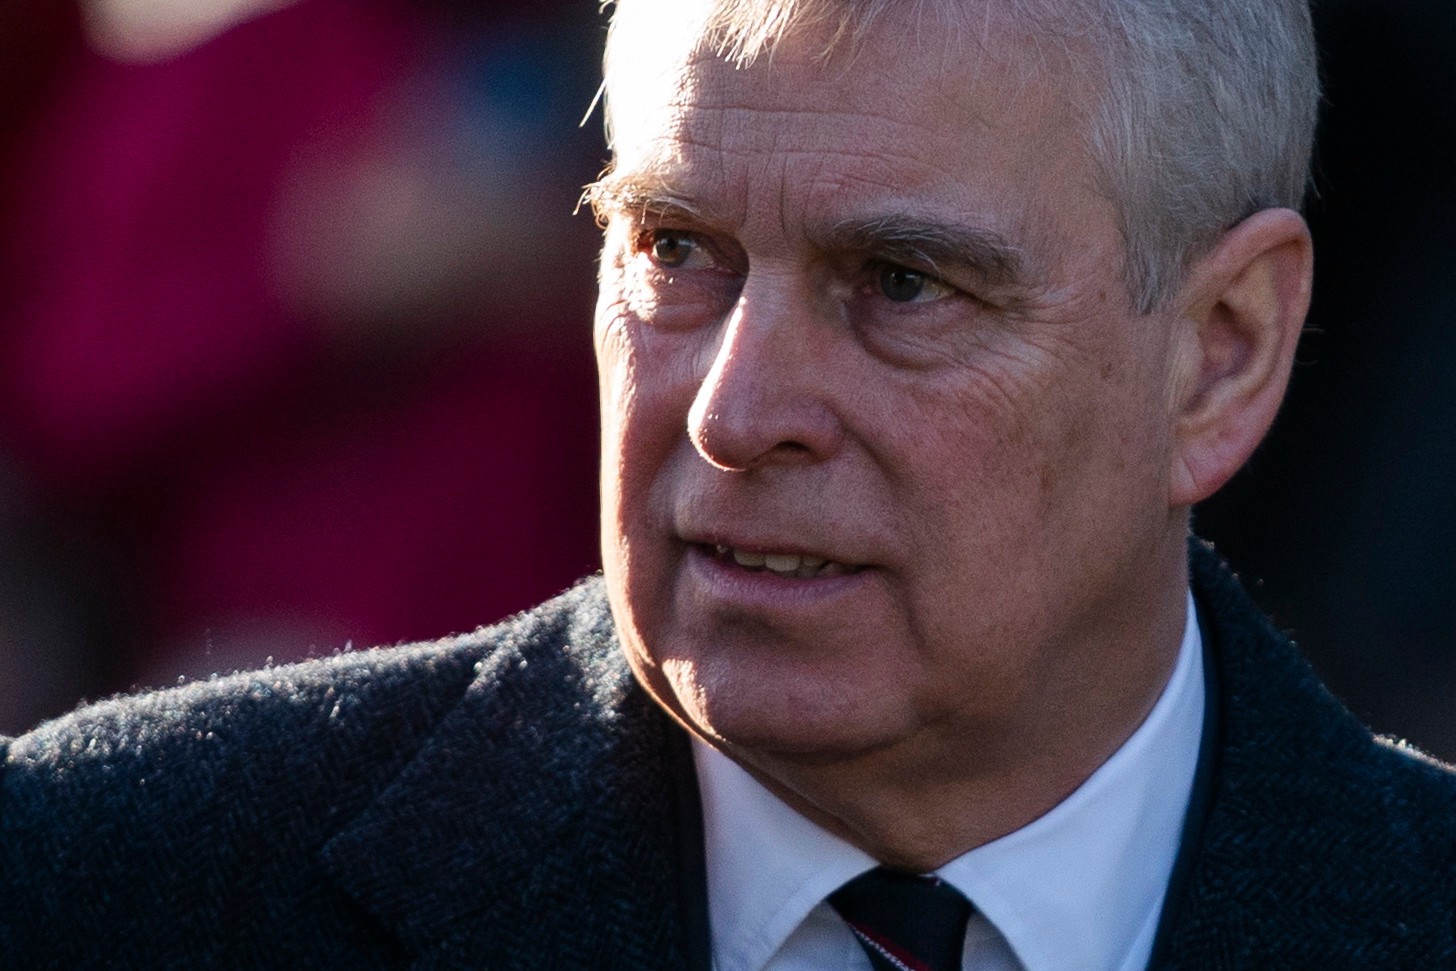 Prince Andrew has reportedly insisted he has not been approached by the FBI